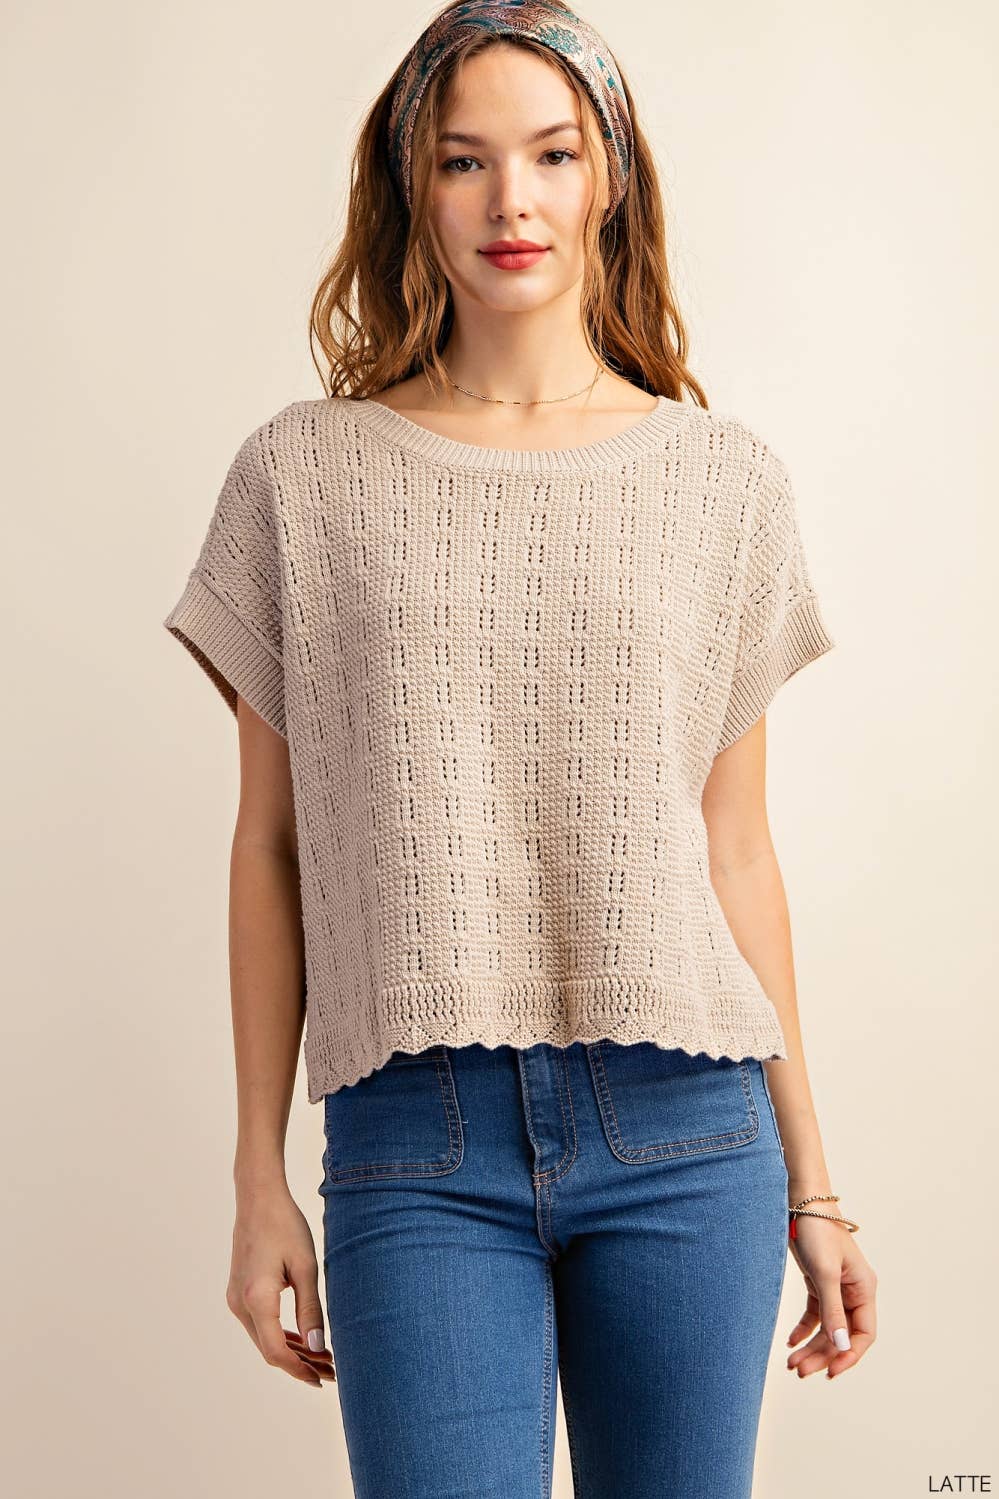 LATTE COTTON THREAD TEXTURE RELAX FIT SWEATER TOP